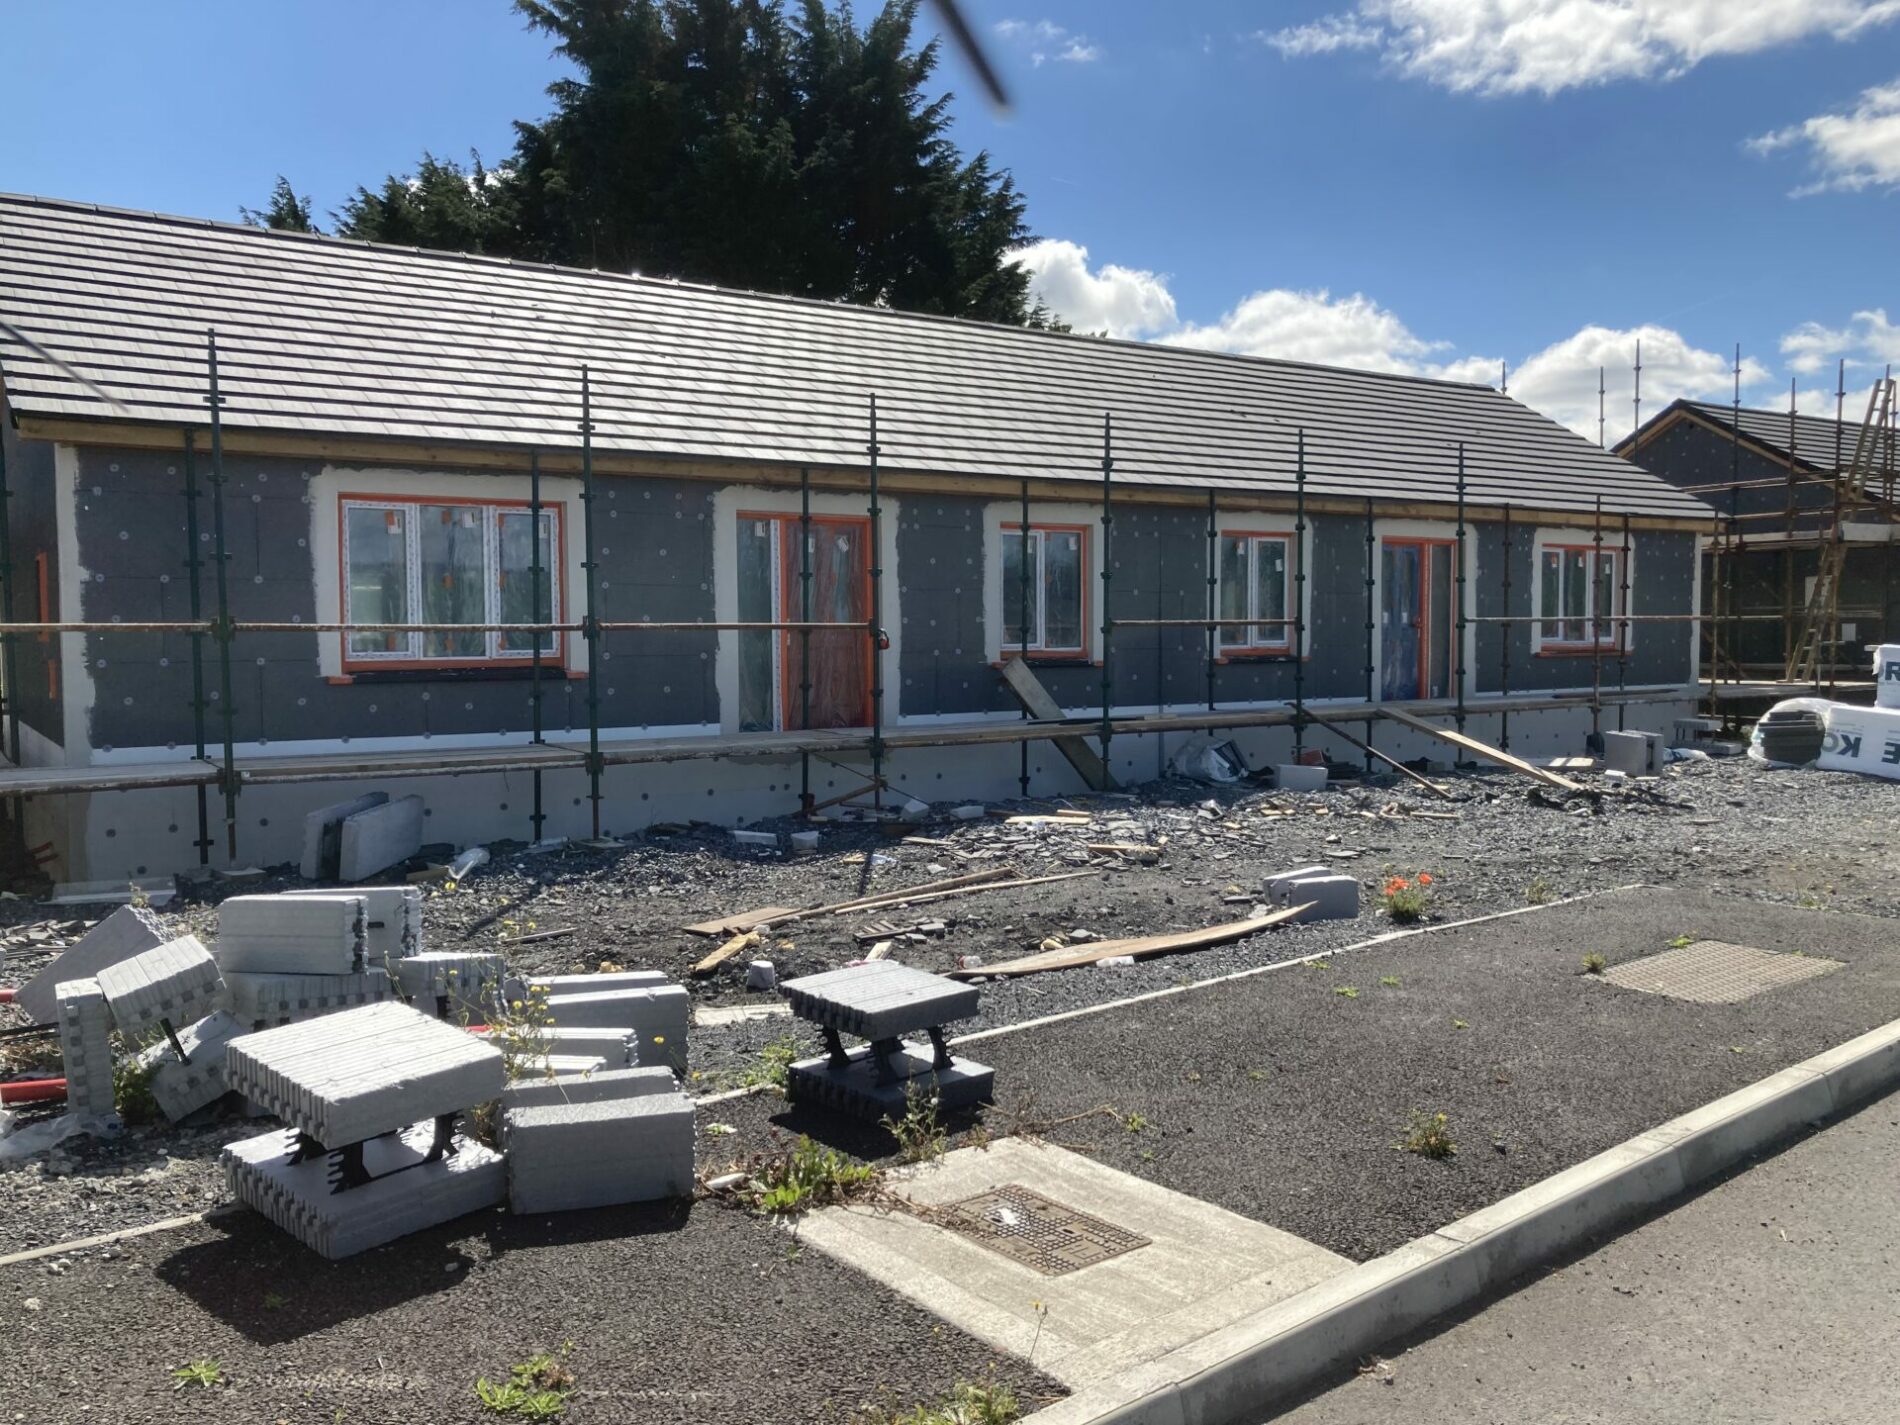 H4.0E St Mary’s Court, Carlow town, July 2022